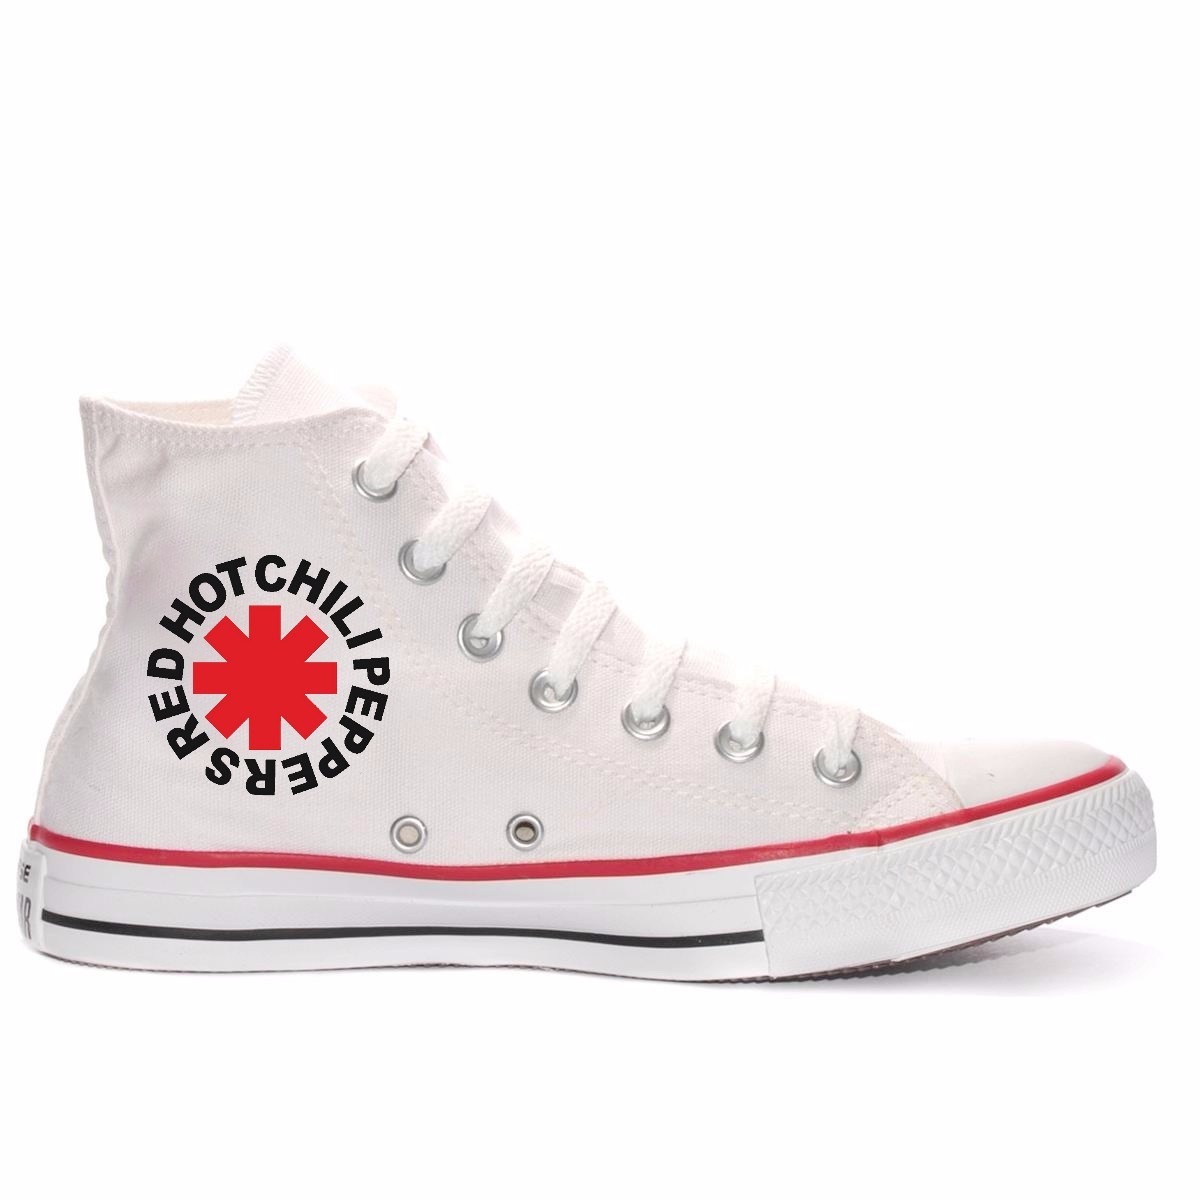 converse red hot chili peppers